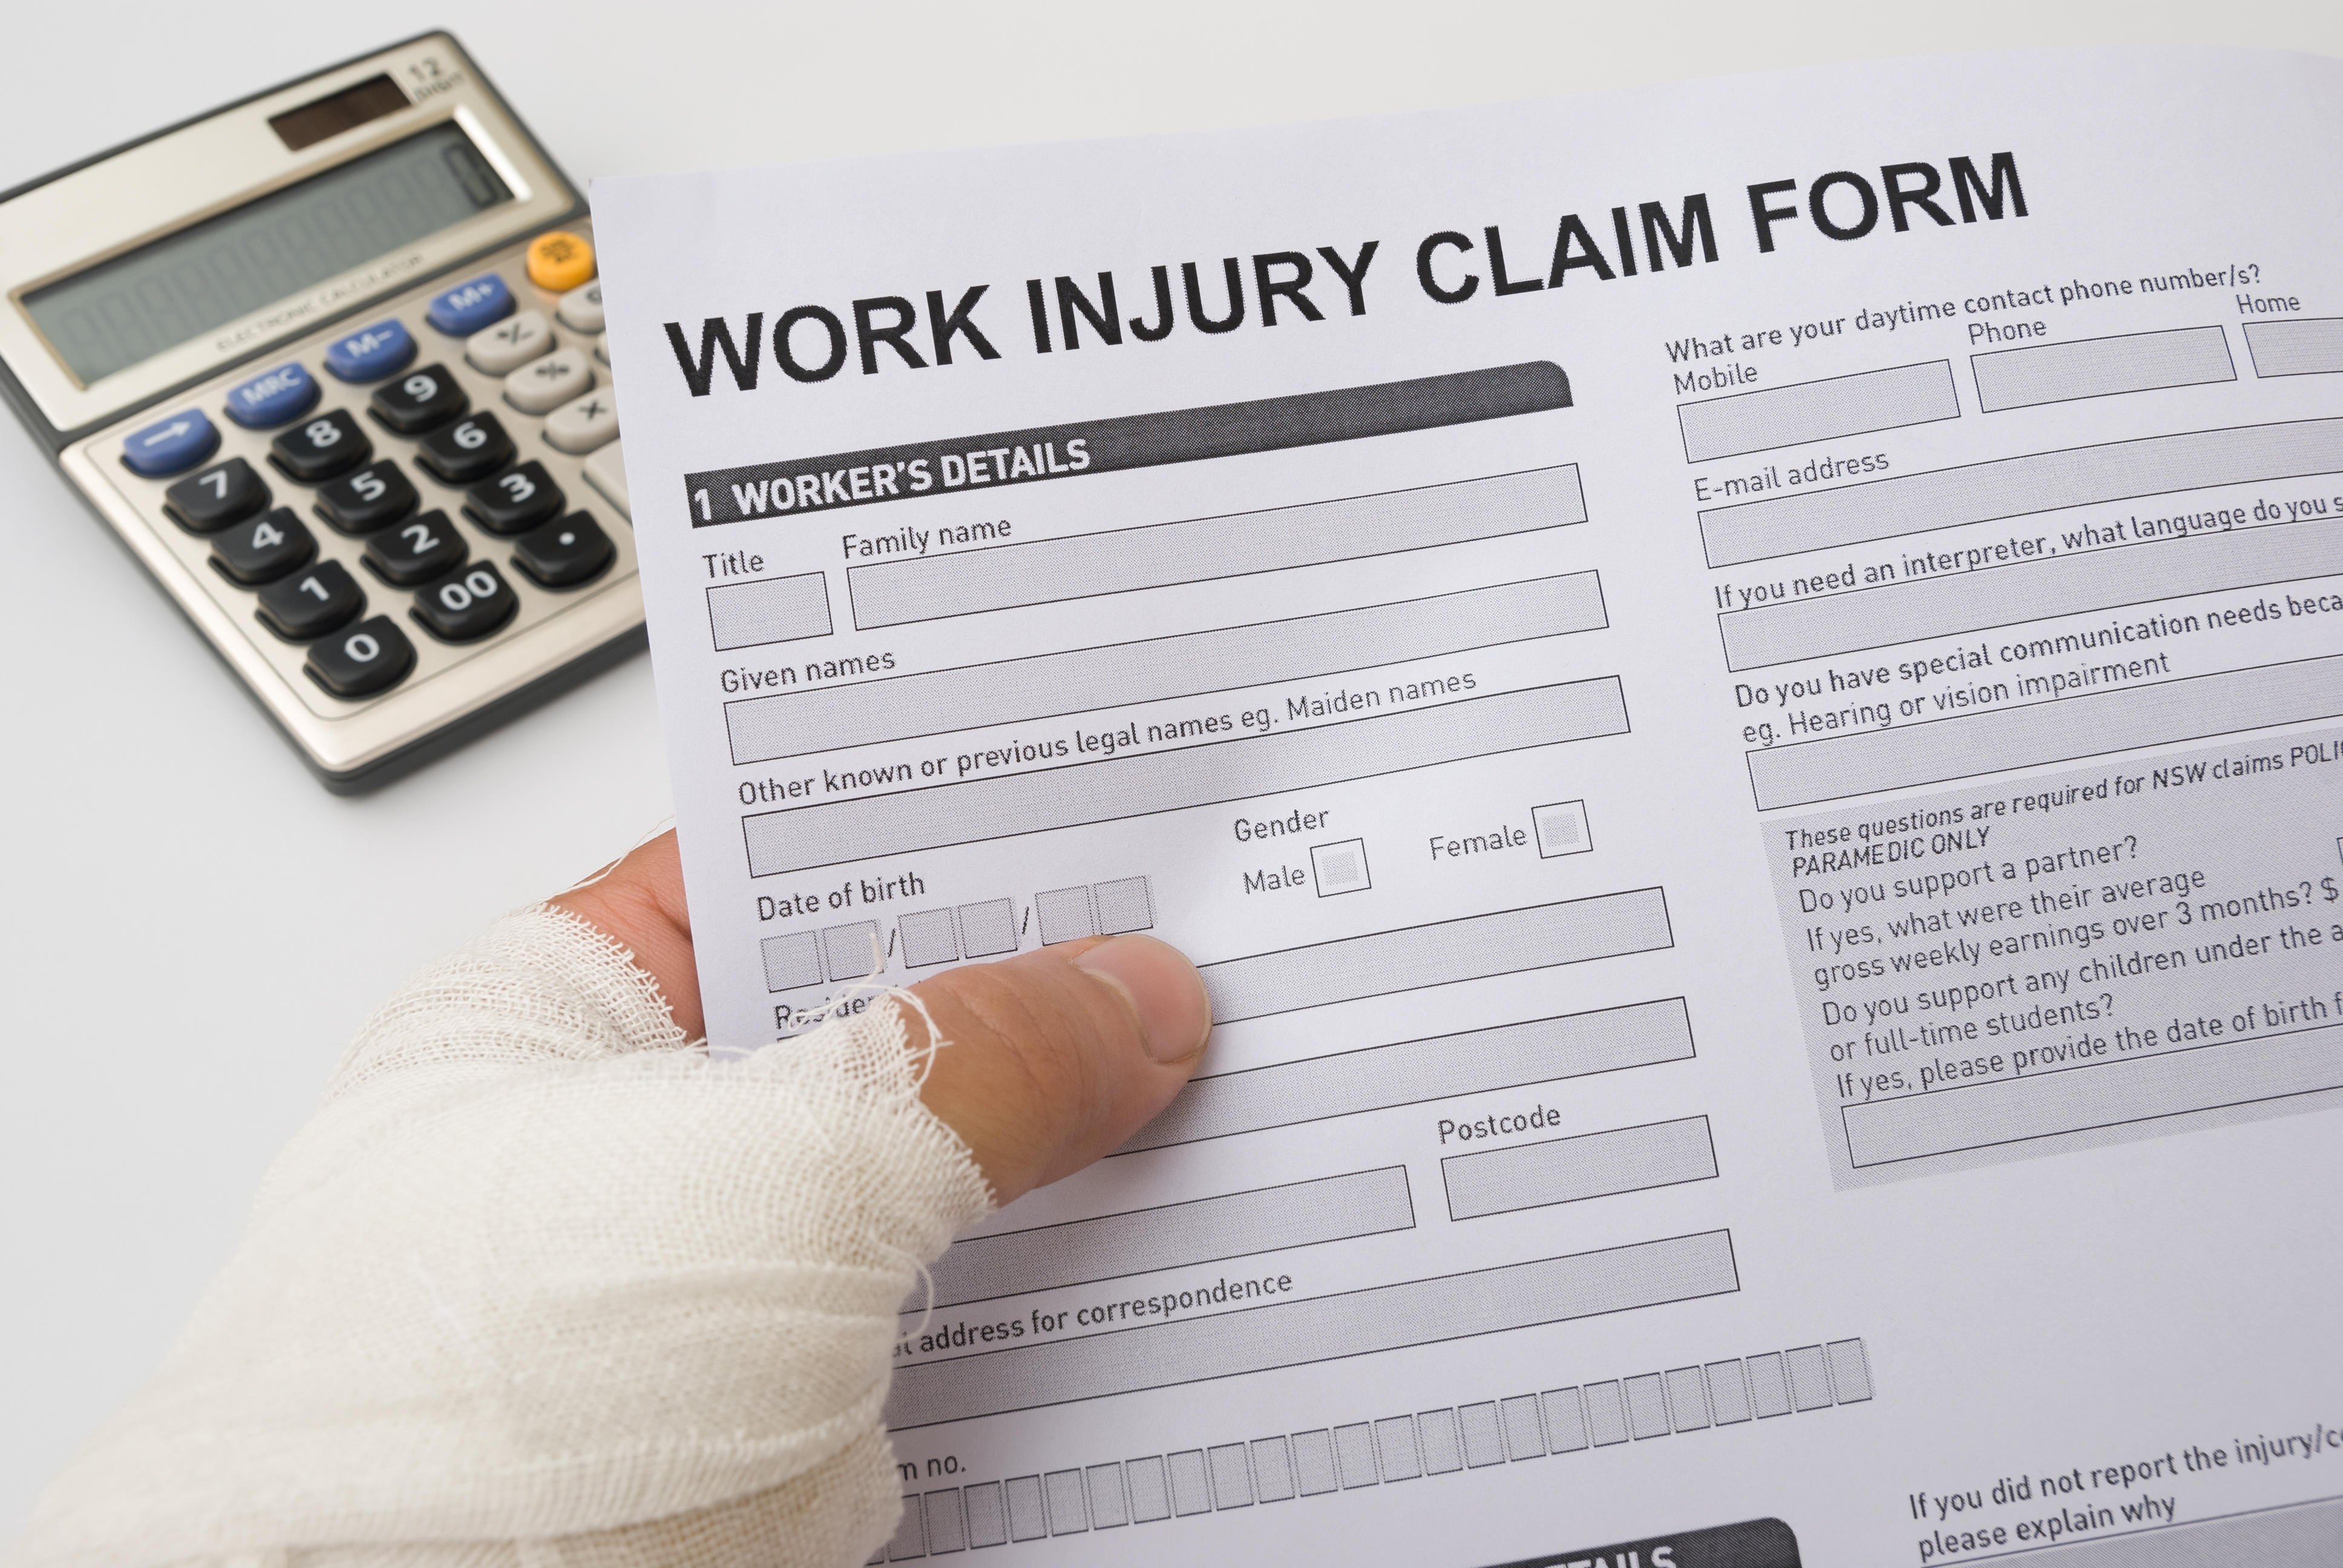 Can you reopen a workers comp claim?